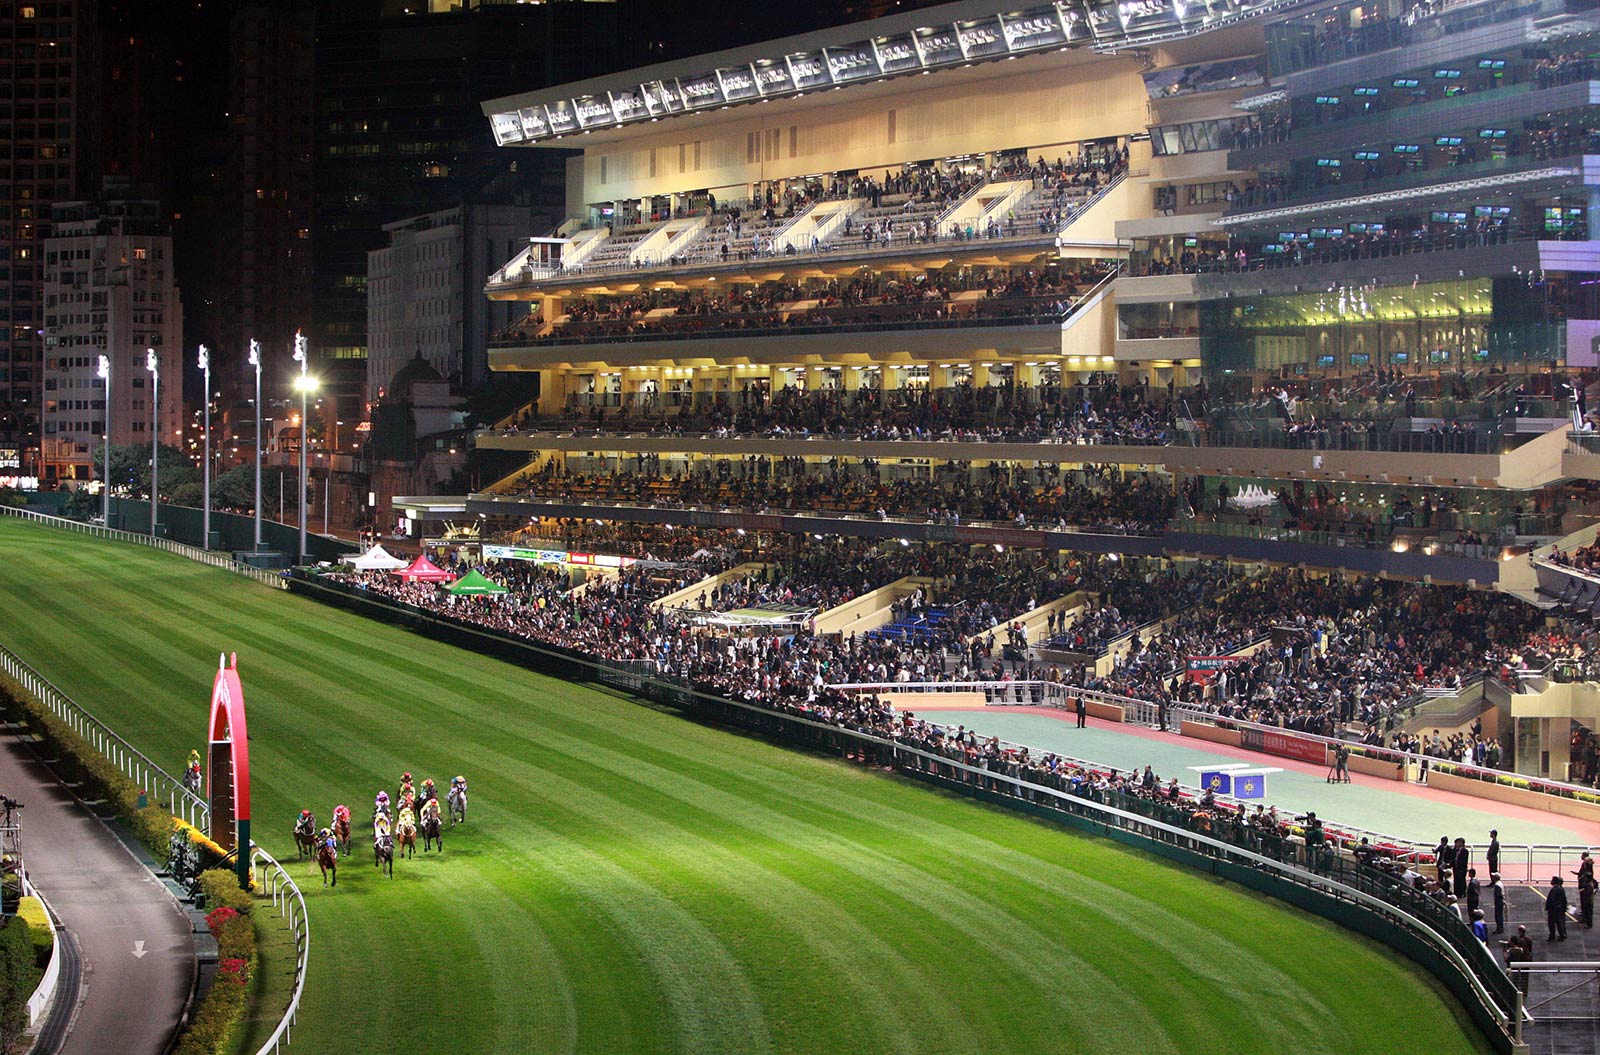 View of the Happy Valley horse race track, Hong Kong, China